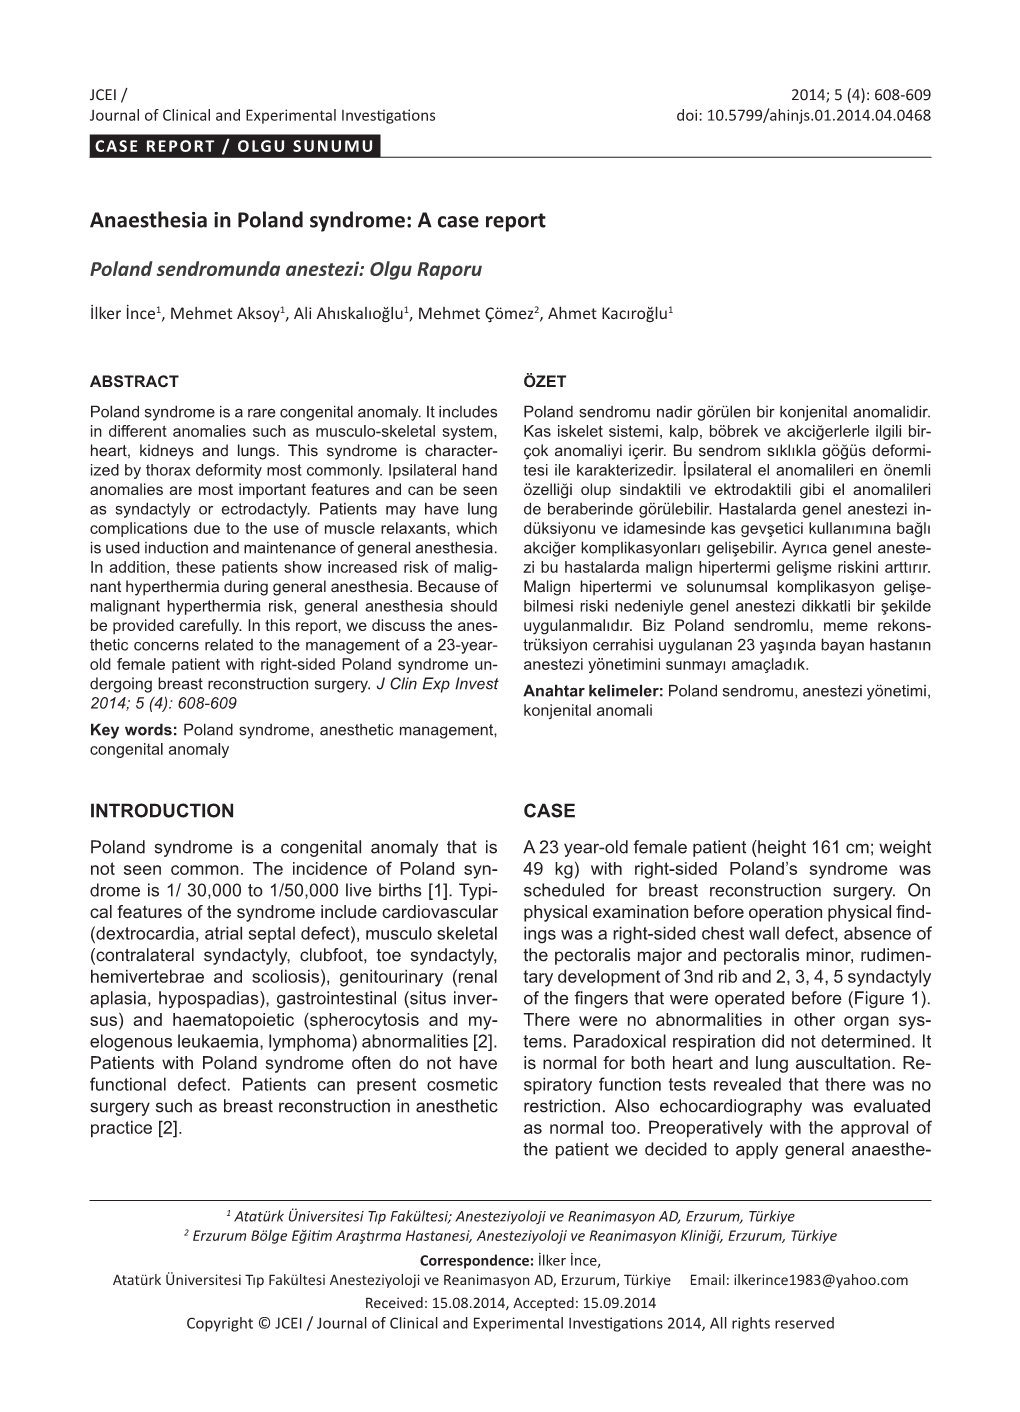 Anaesthesia in Poland Syndrome: a Case Report